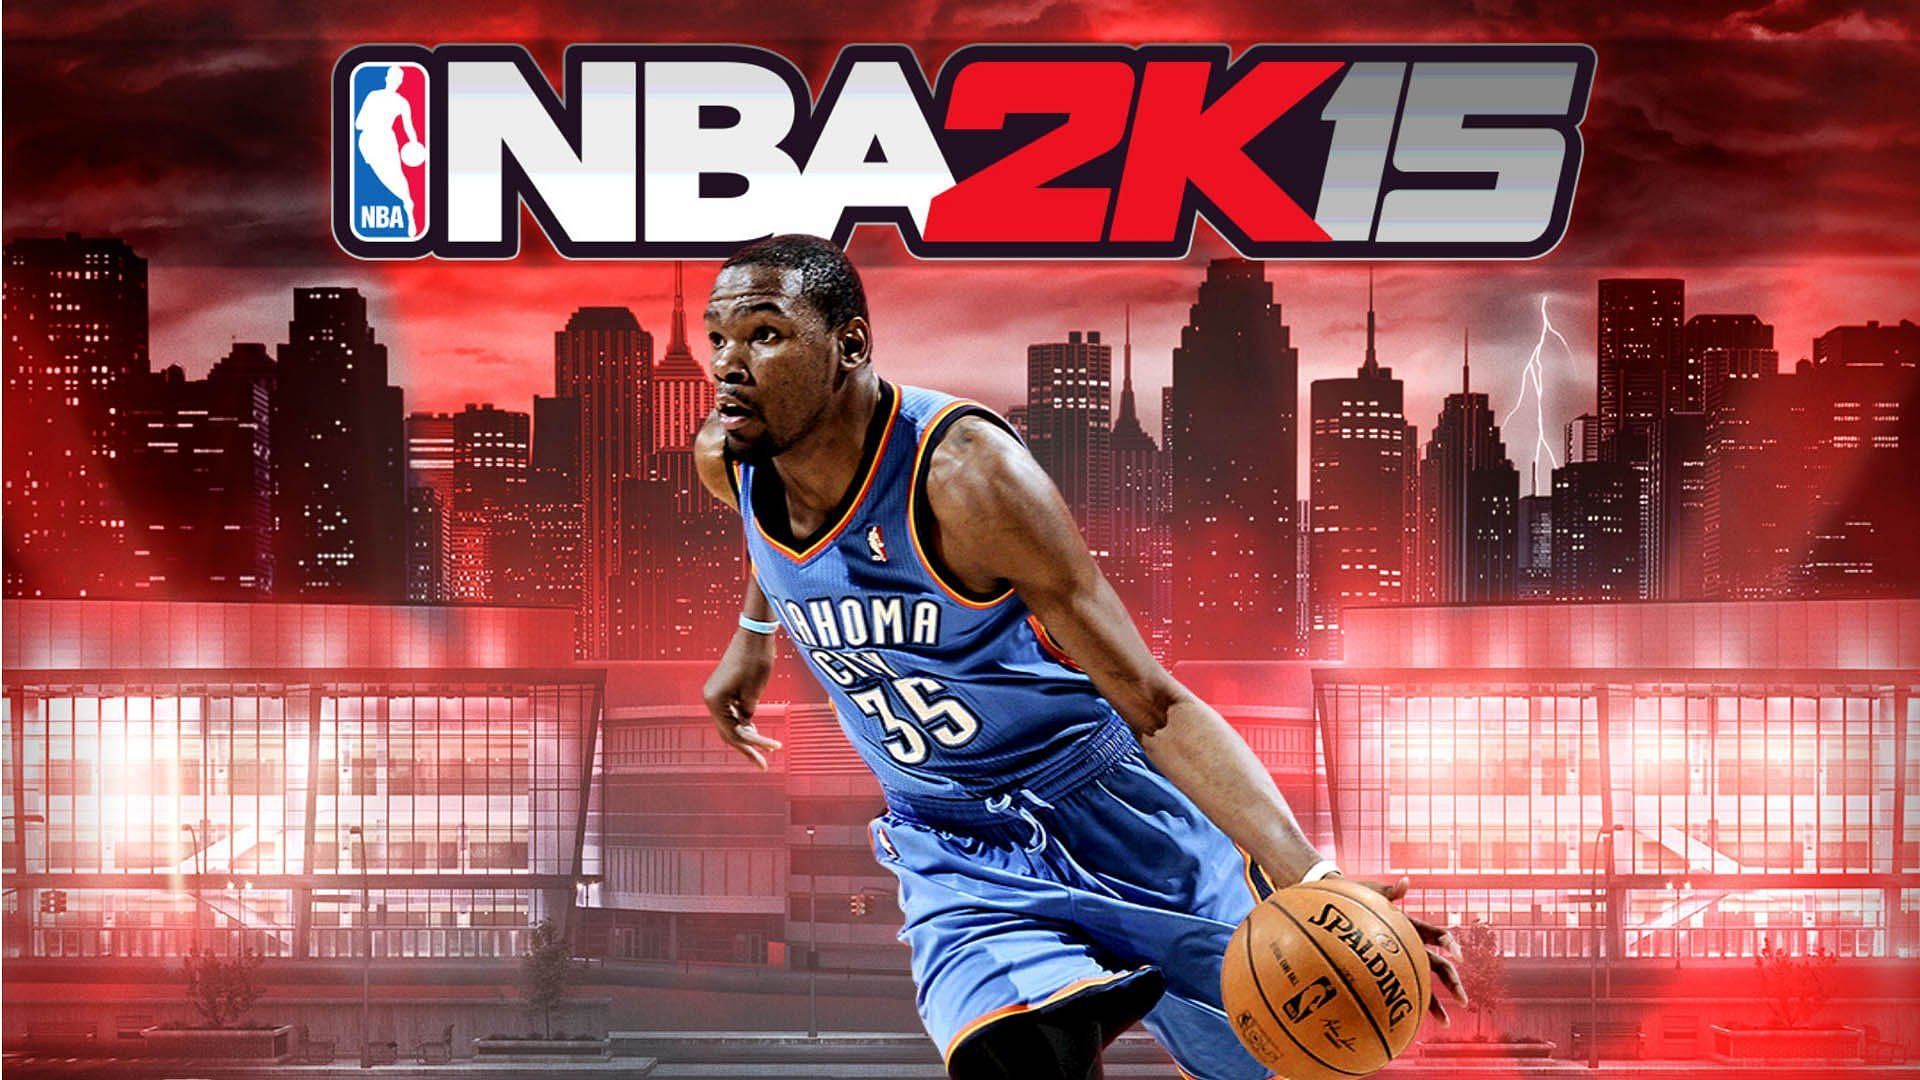 Kevin Durant on the cover of NBA 2K15